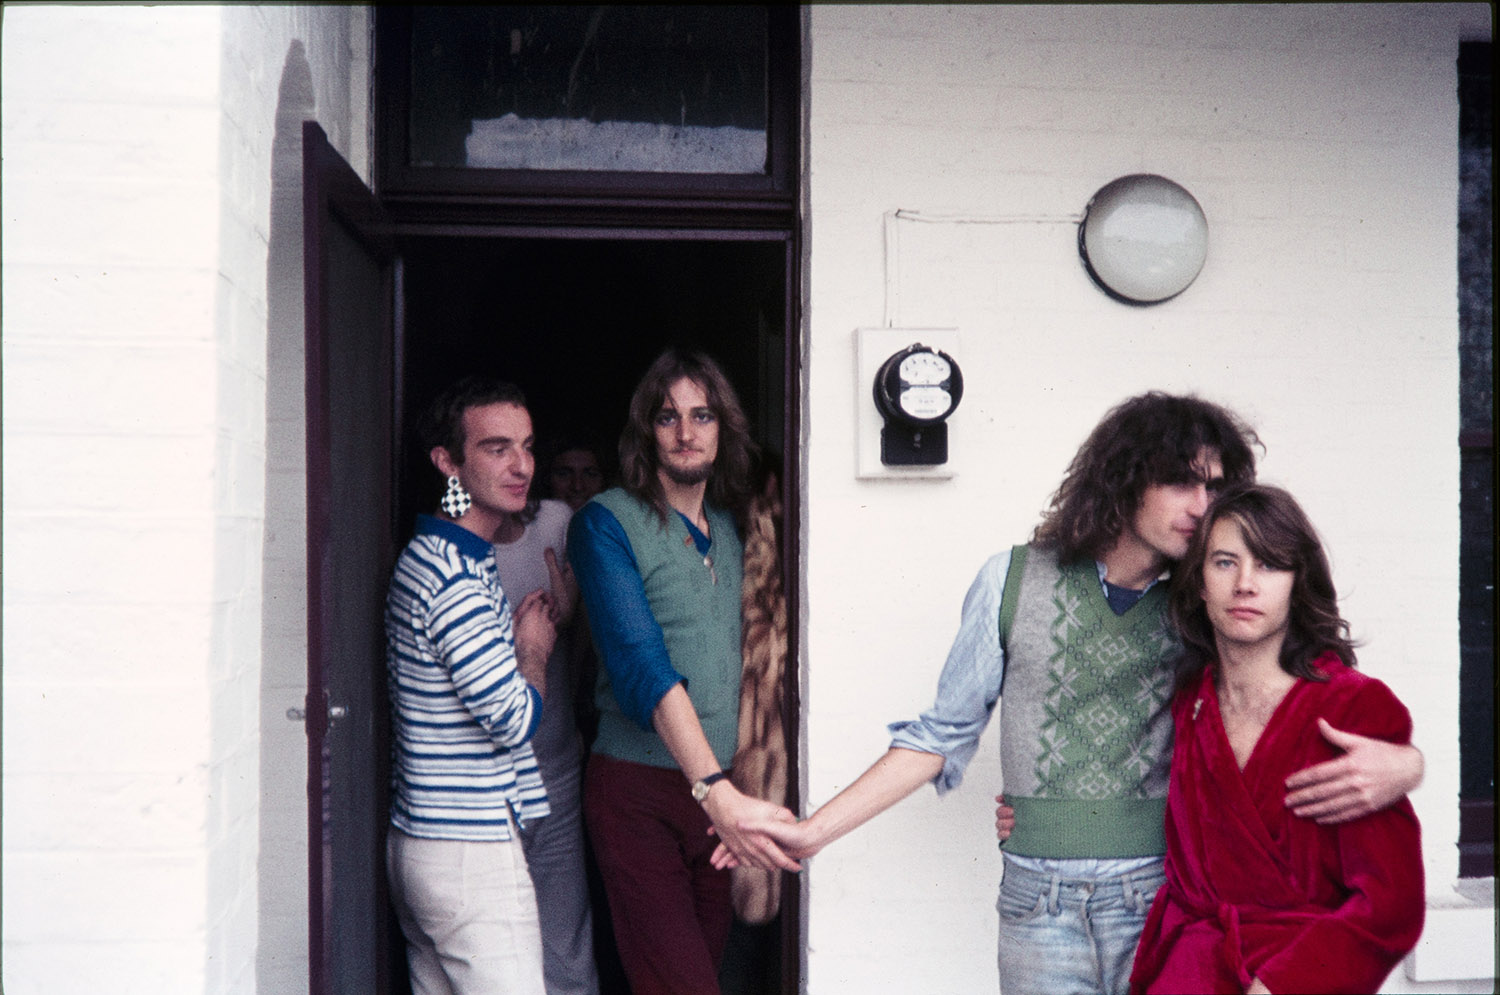 Colour photograph of four people standing at the front door of a house.